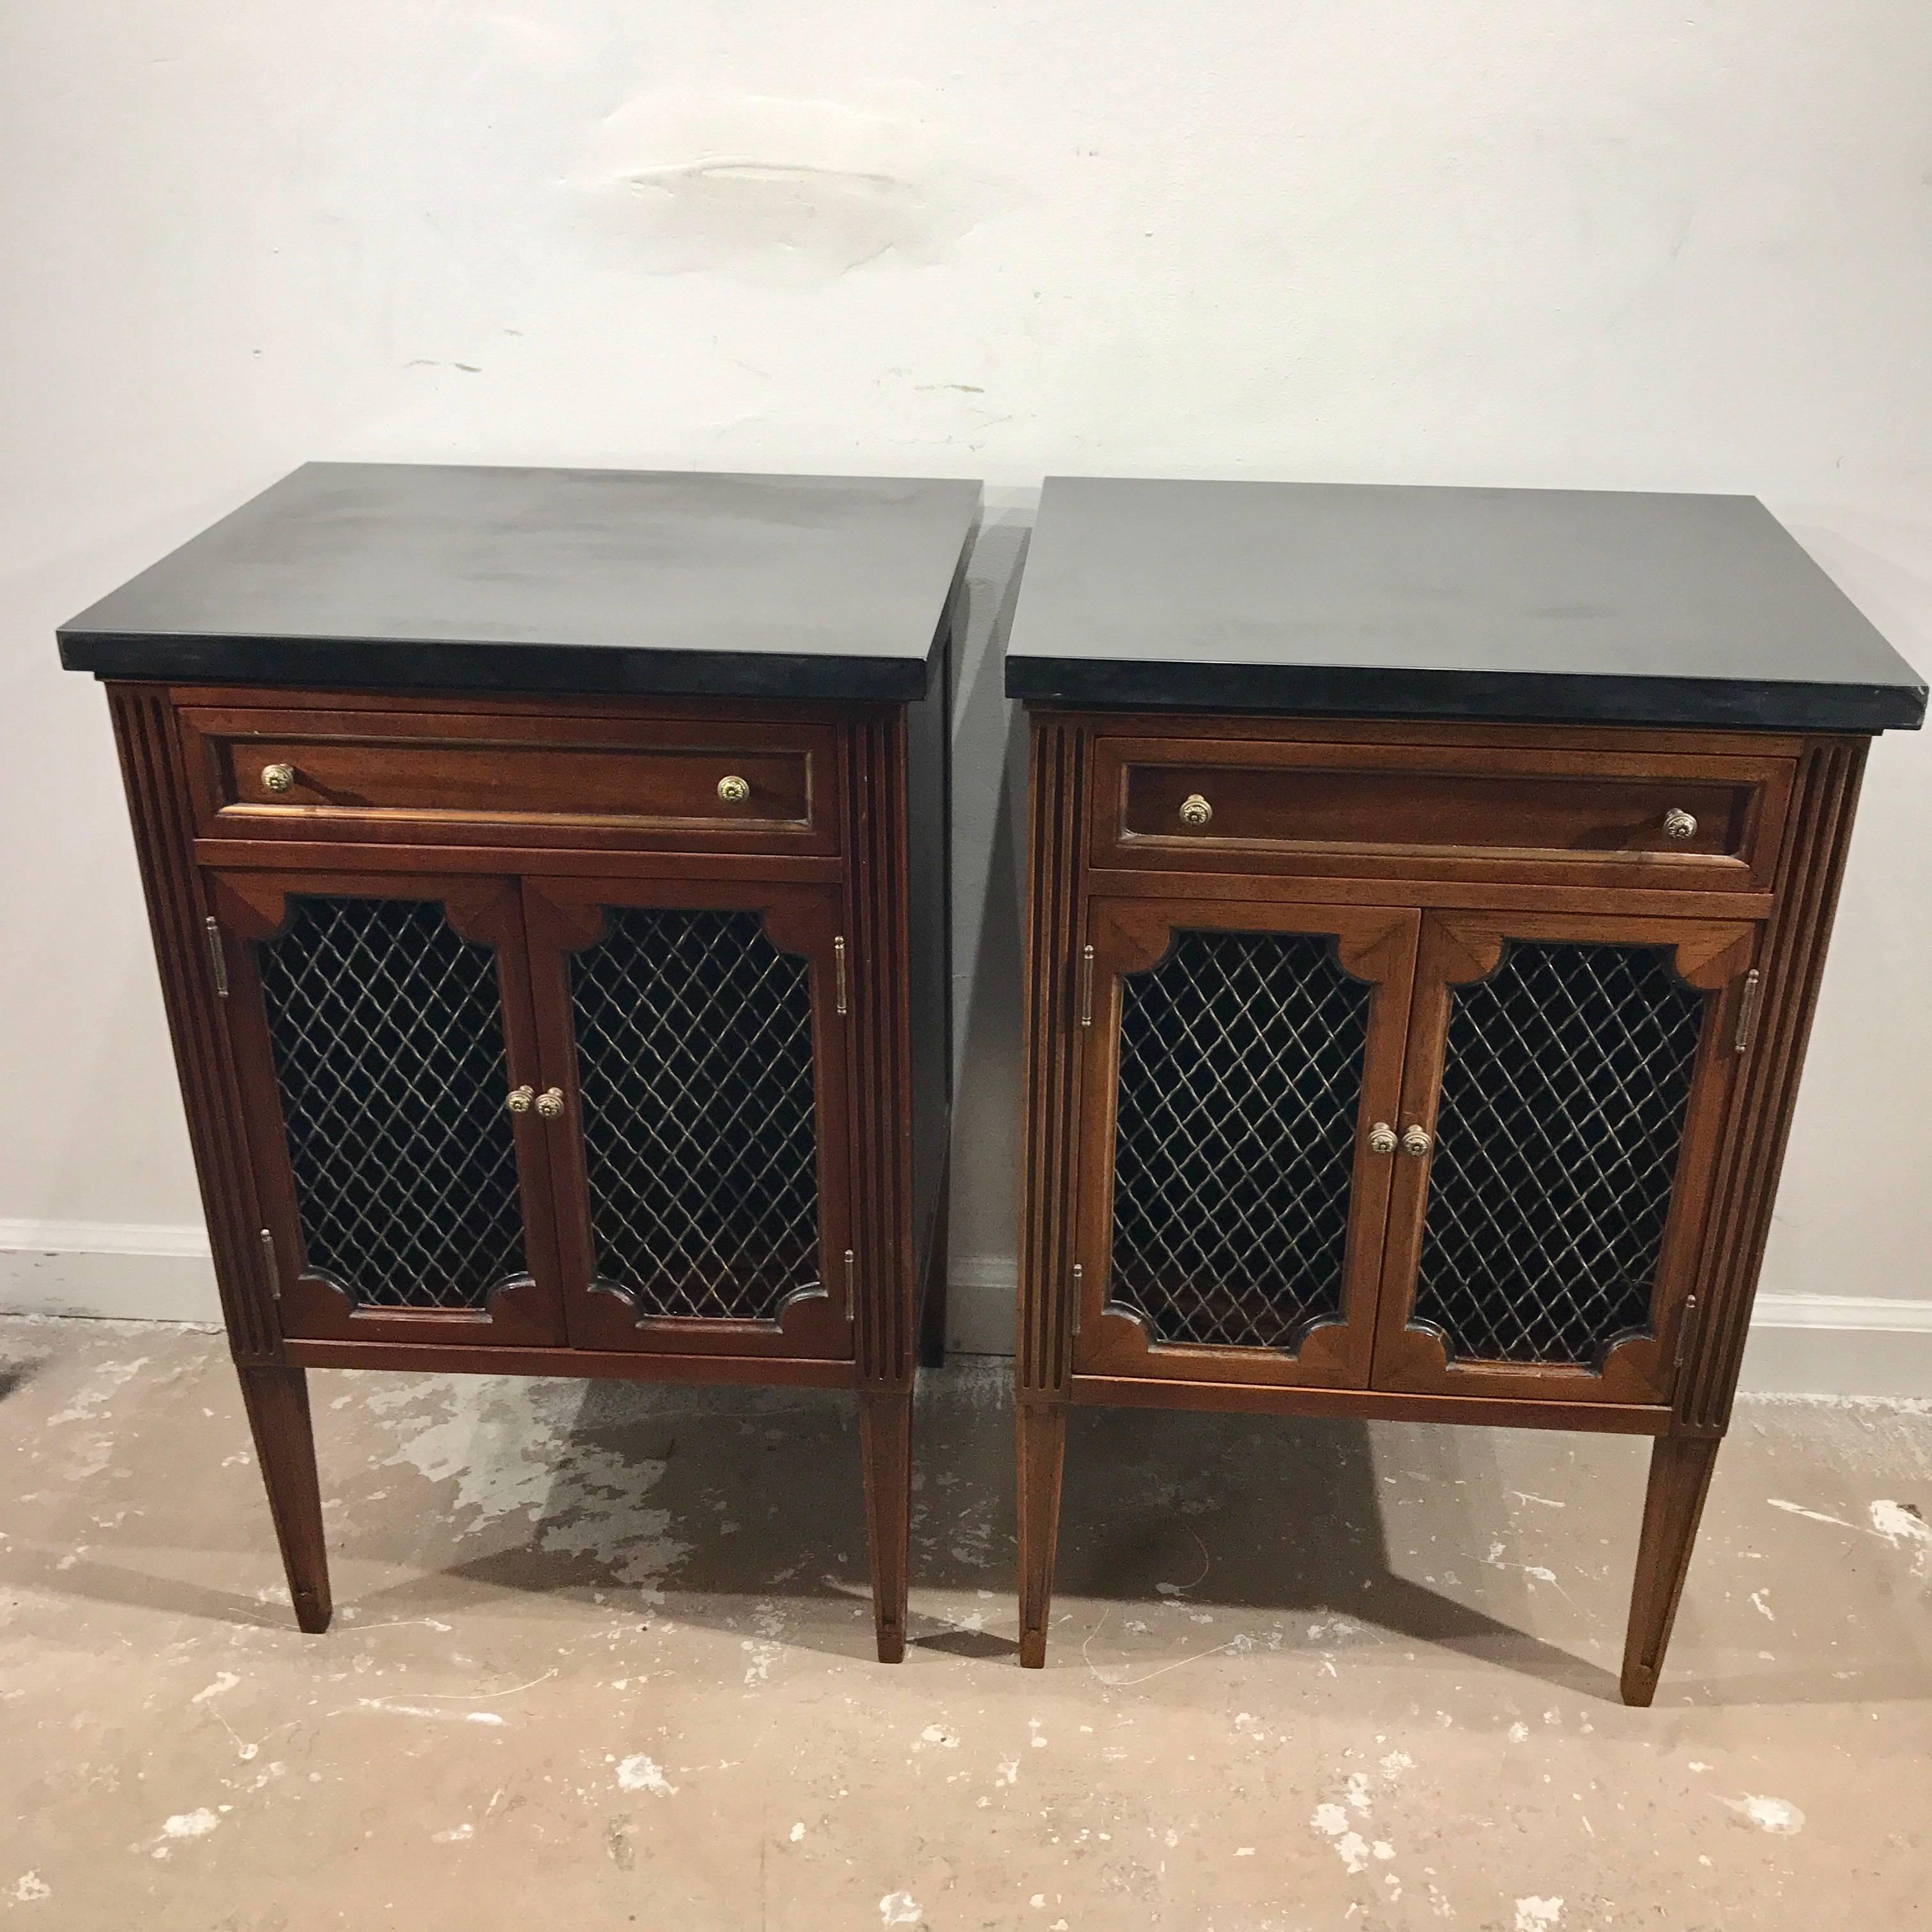 Pair of marble-top Directoire brass-mounted end tables or nightstands, each one with 1-inch thick black marble top resting on a lower case fitted with a 14